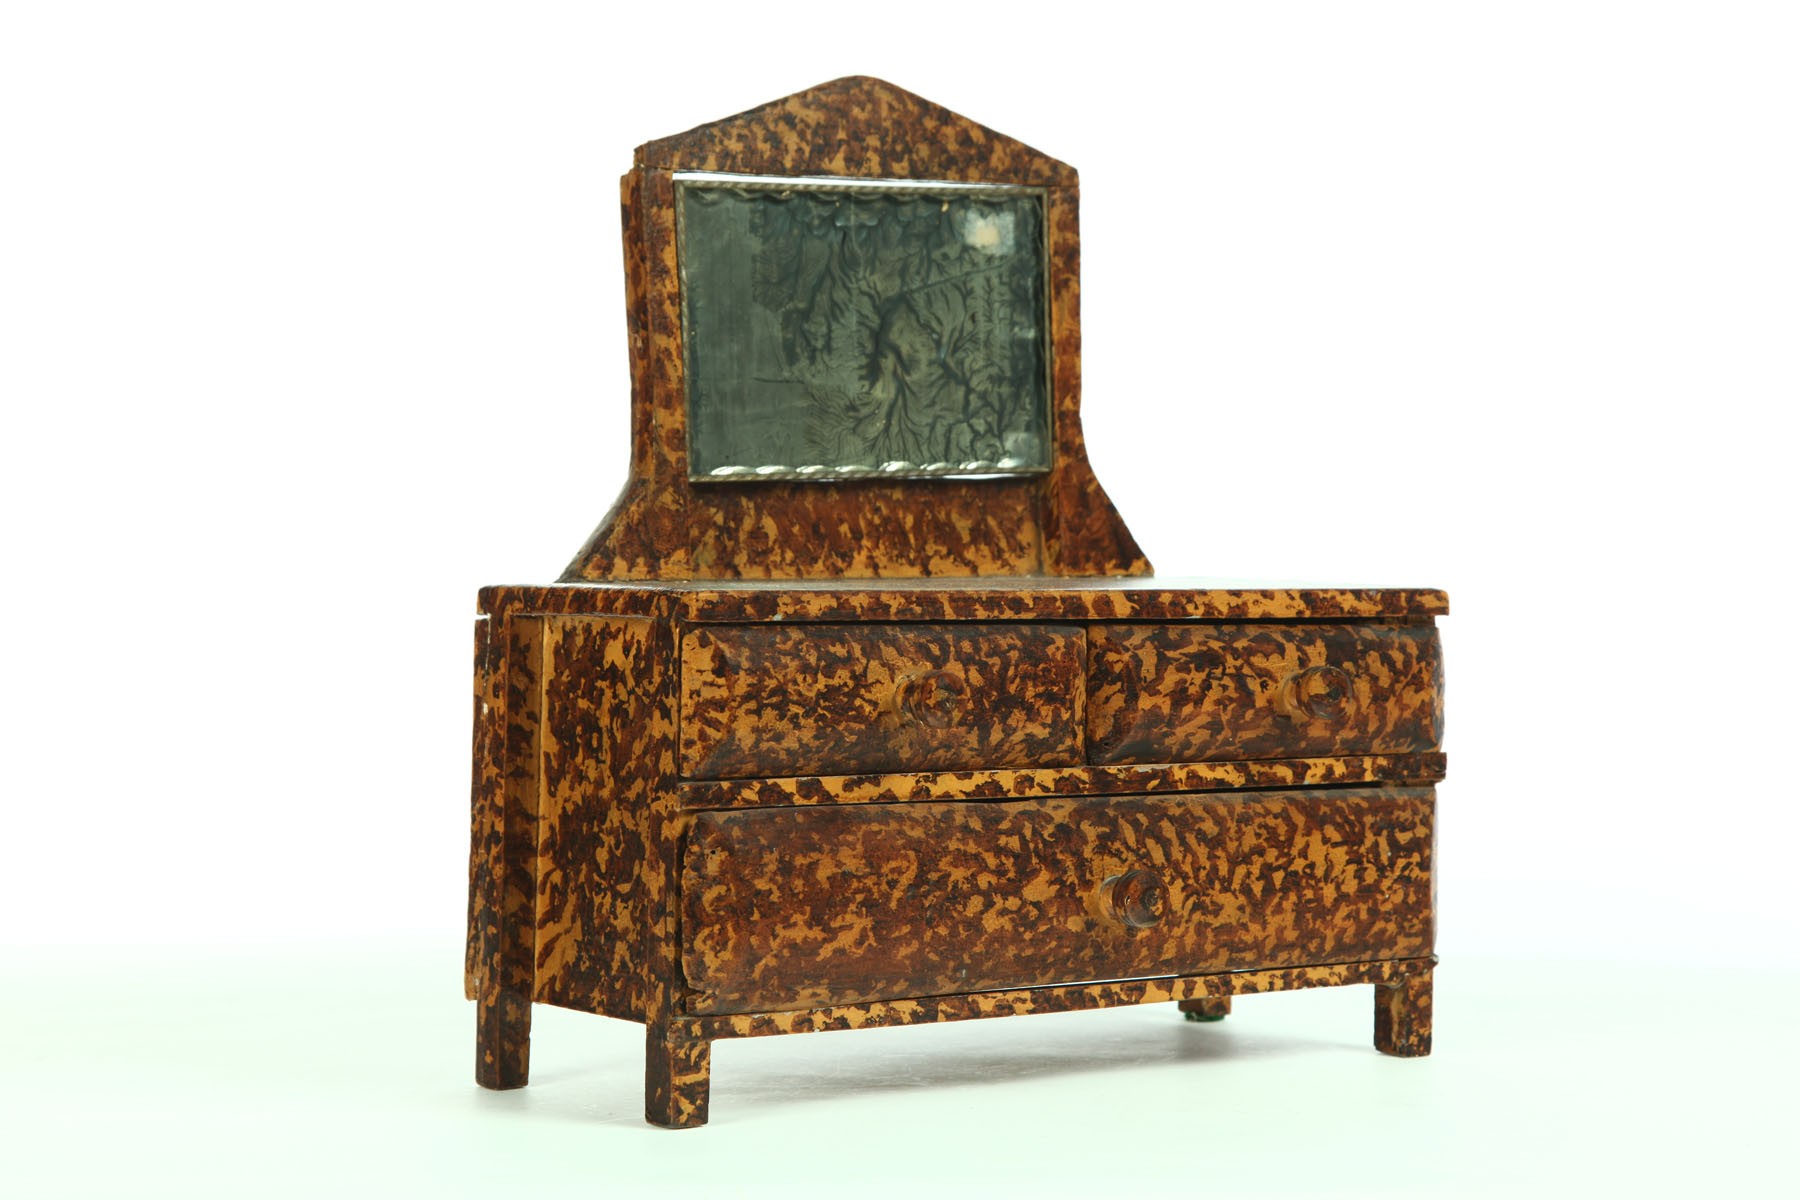 MINIATURE DECORATED CHEST.  American